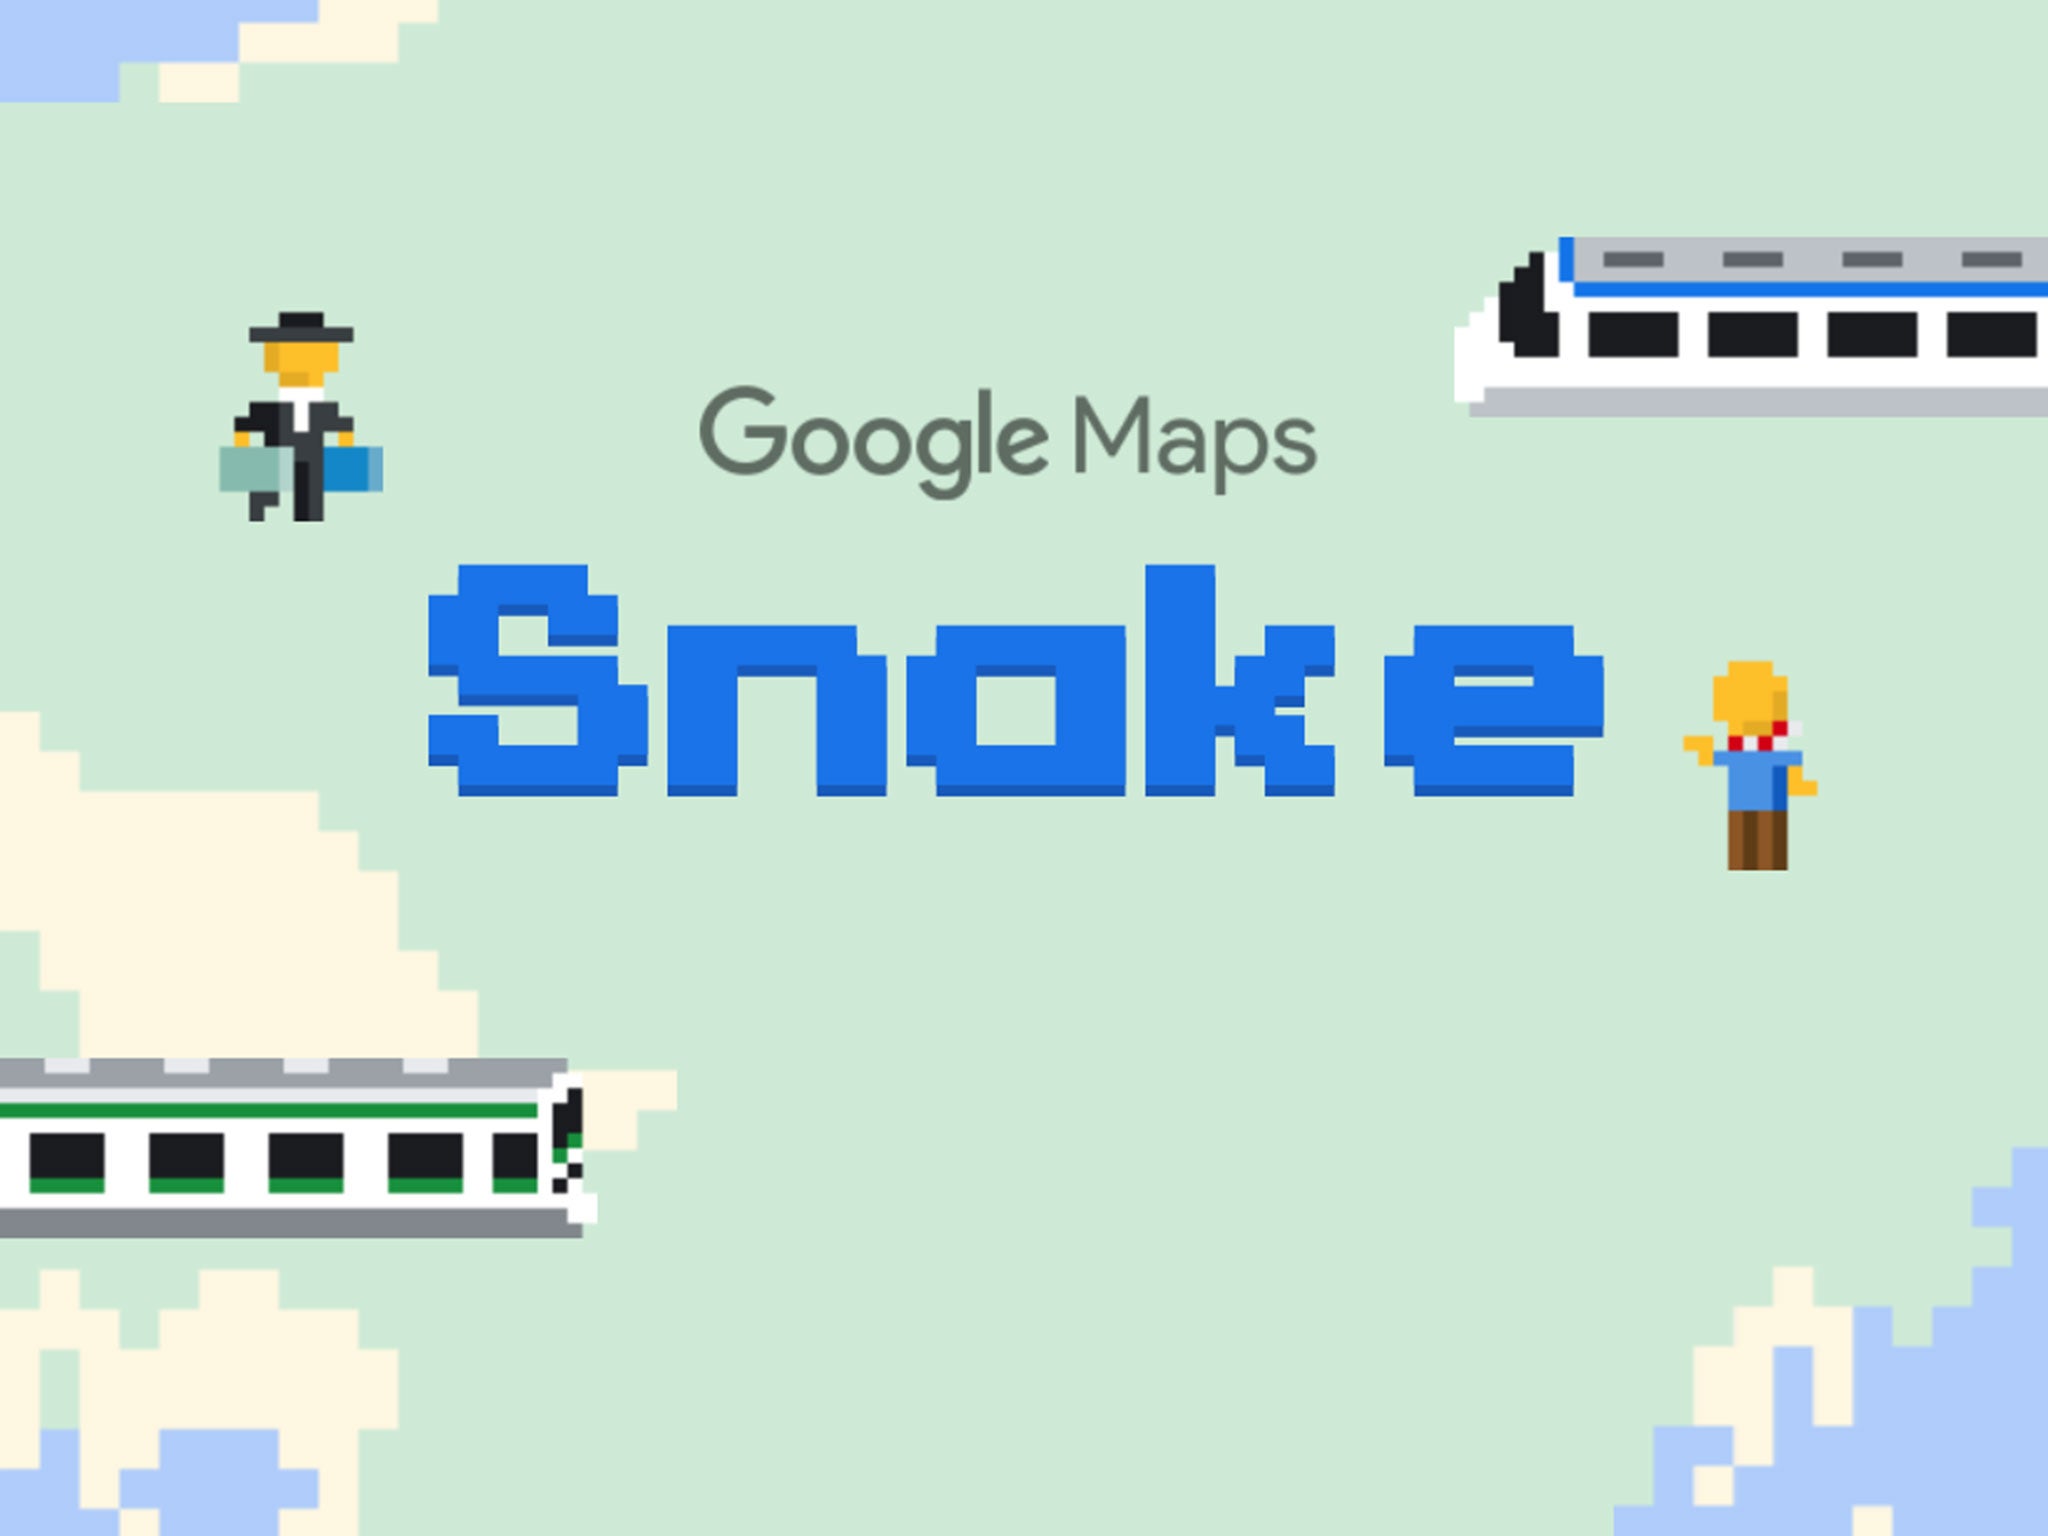 Google Celebrates April Fool's Day 2019 With Classic 'Snakes' Game